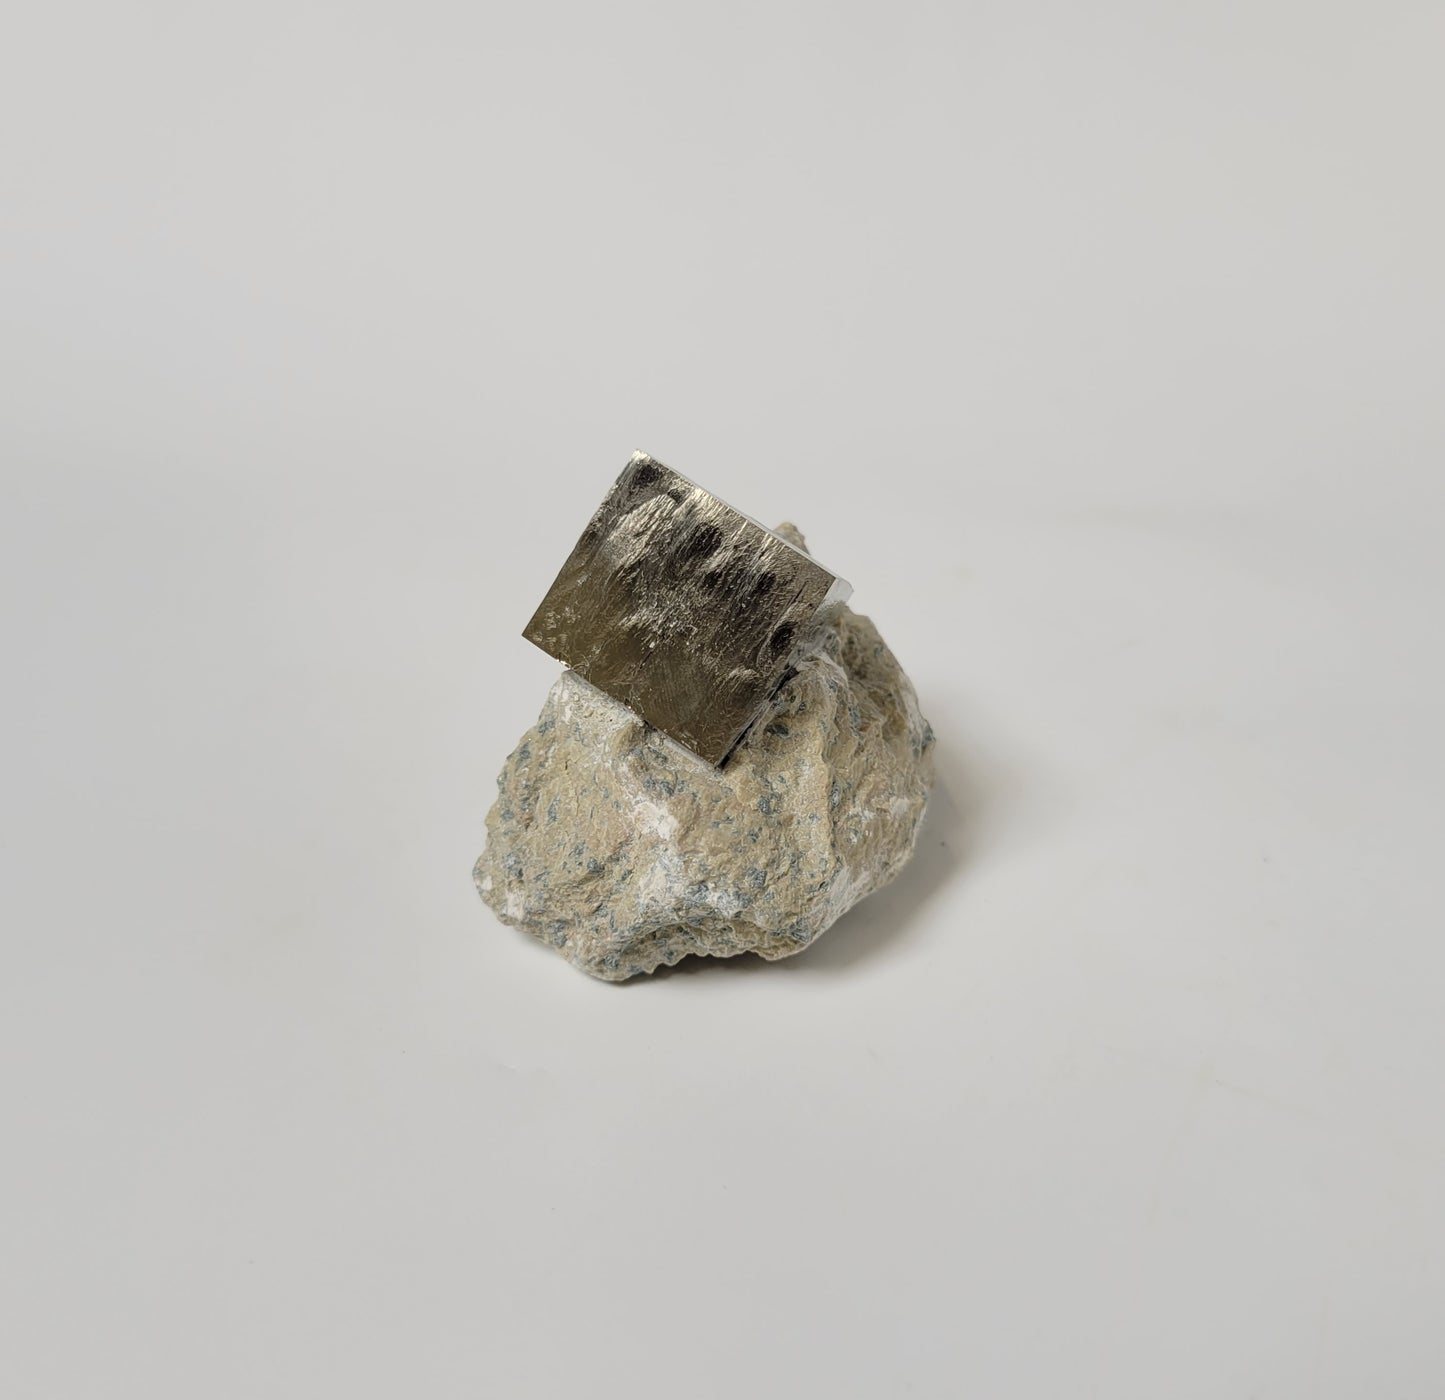 Pyrite on Matrix from Spain